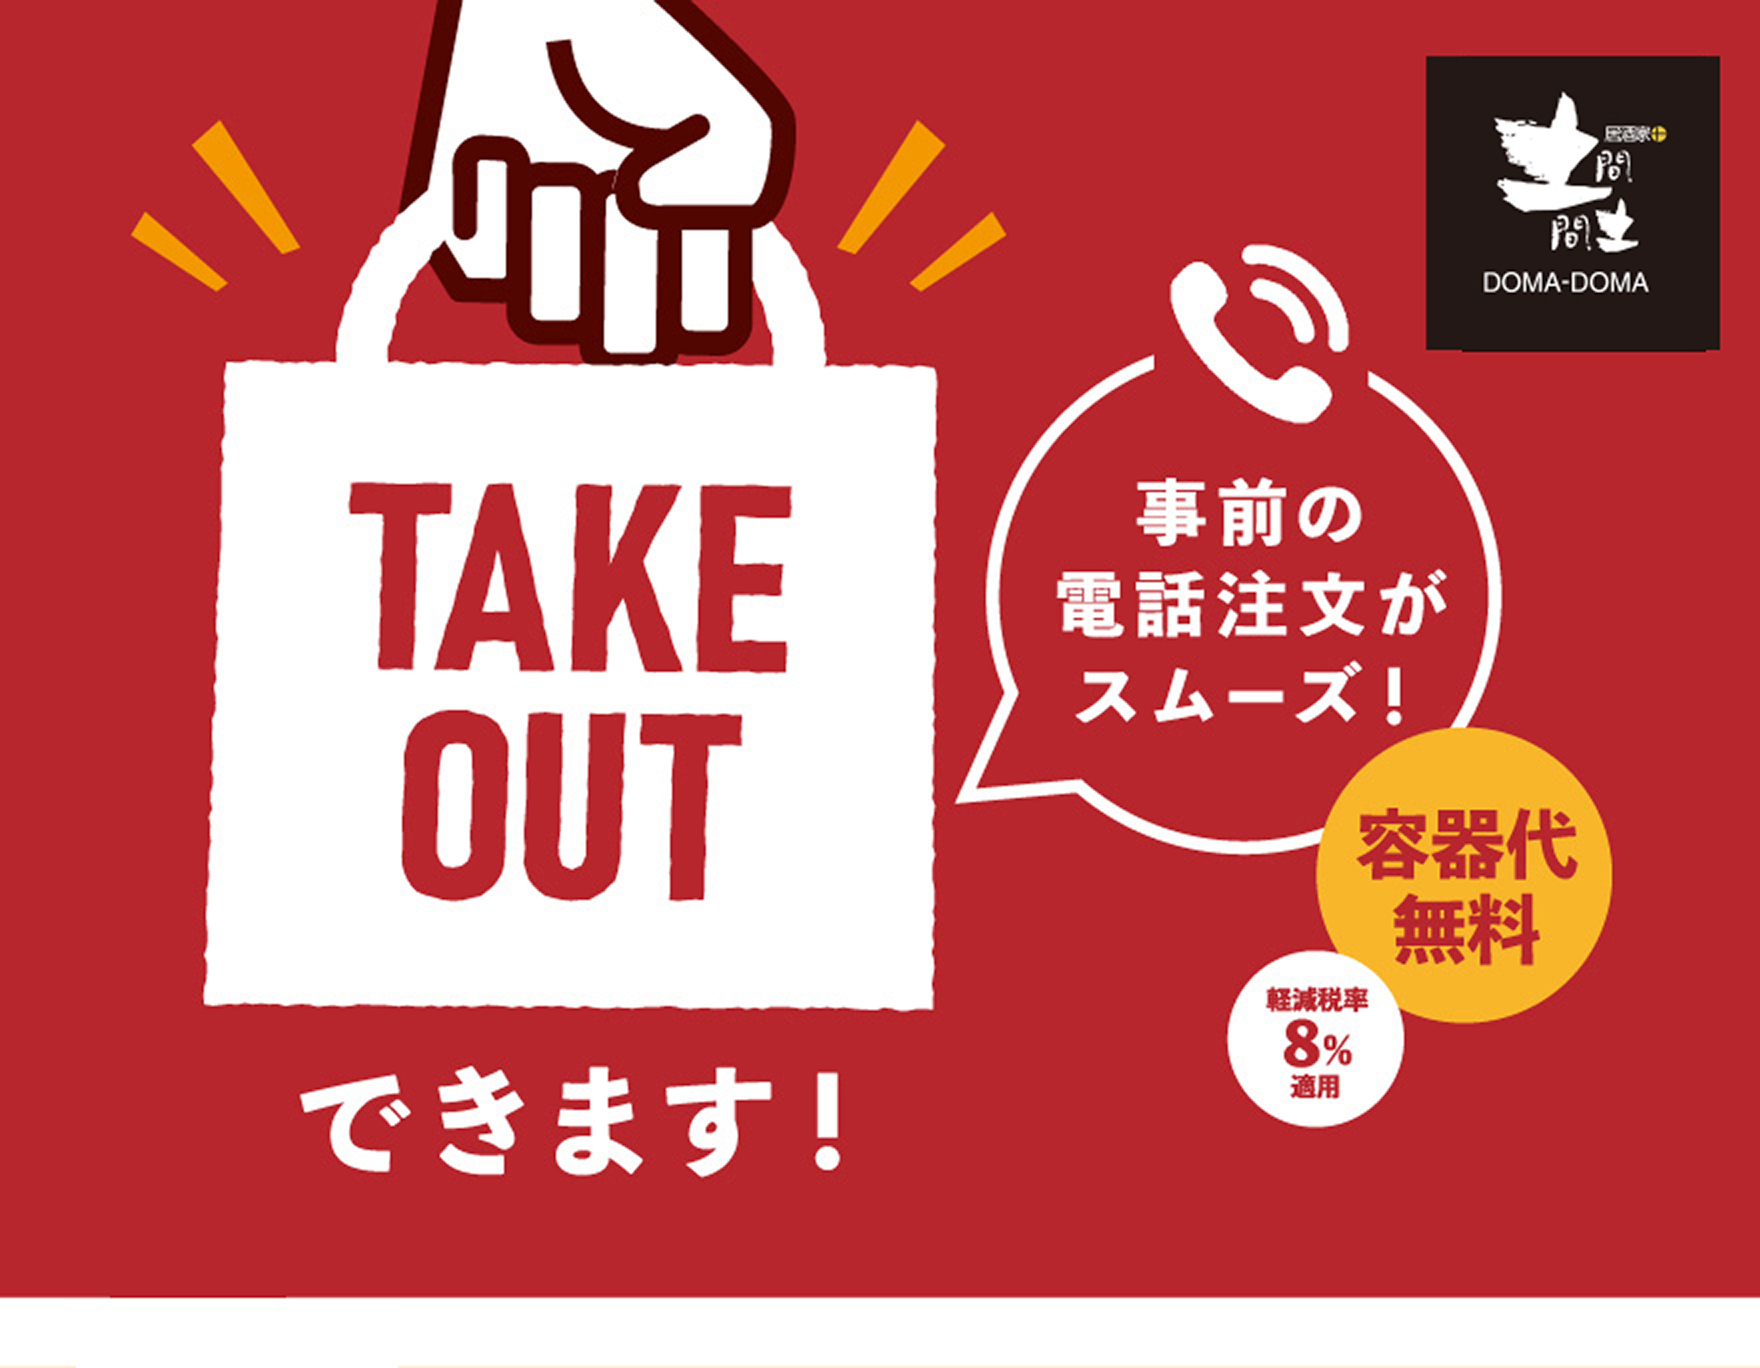 TAKEOUTできます！